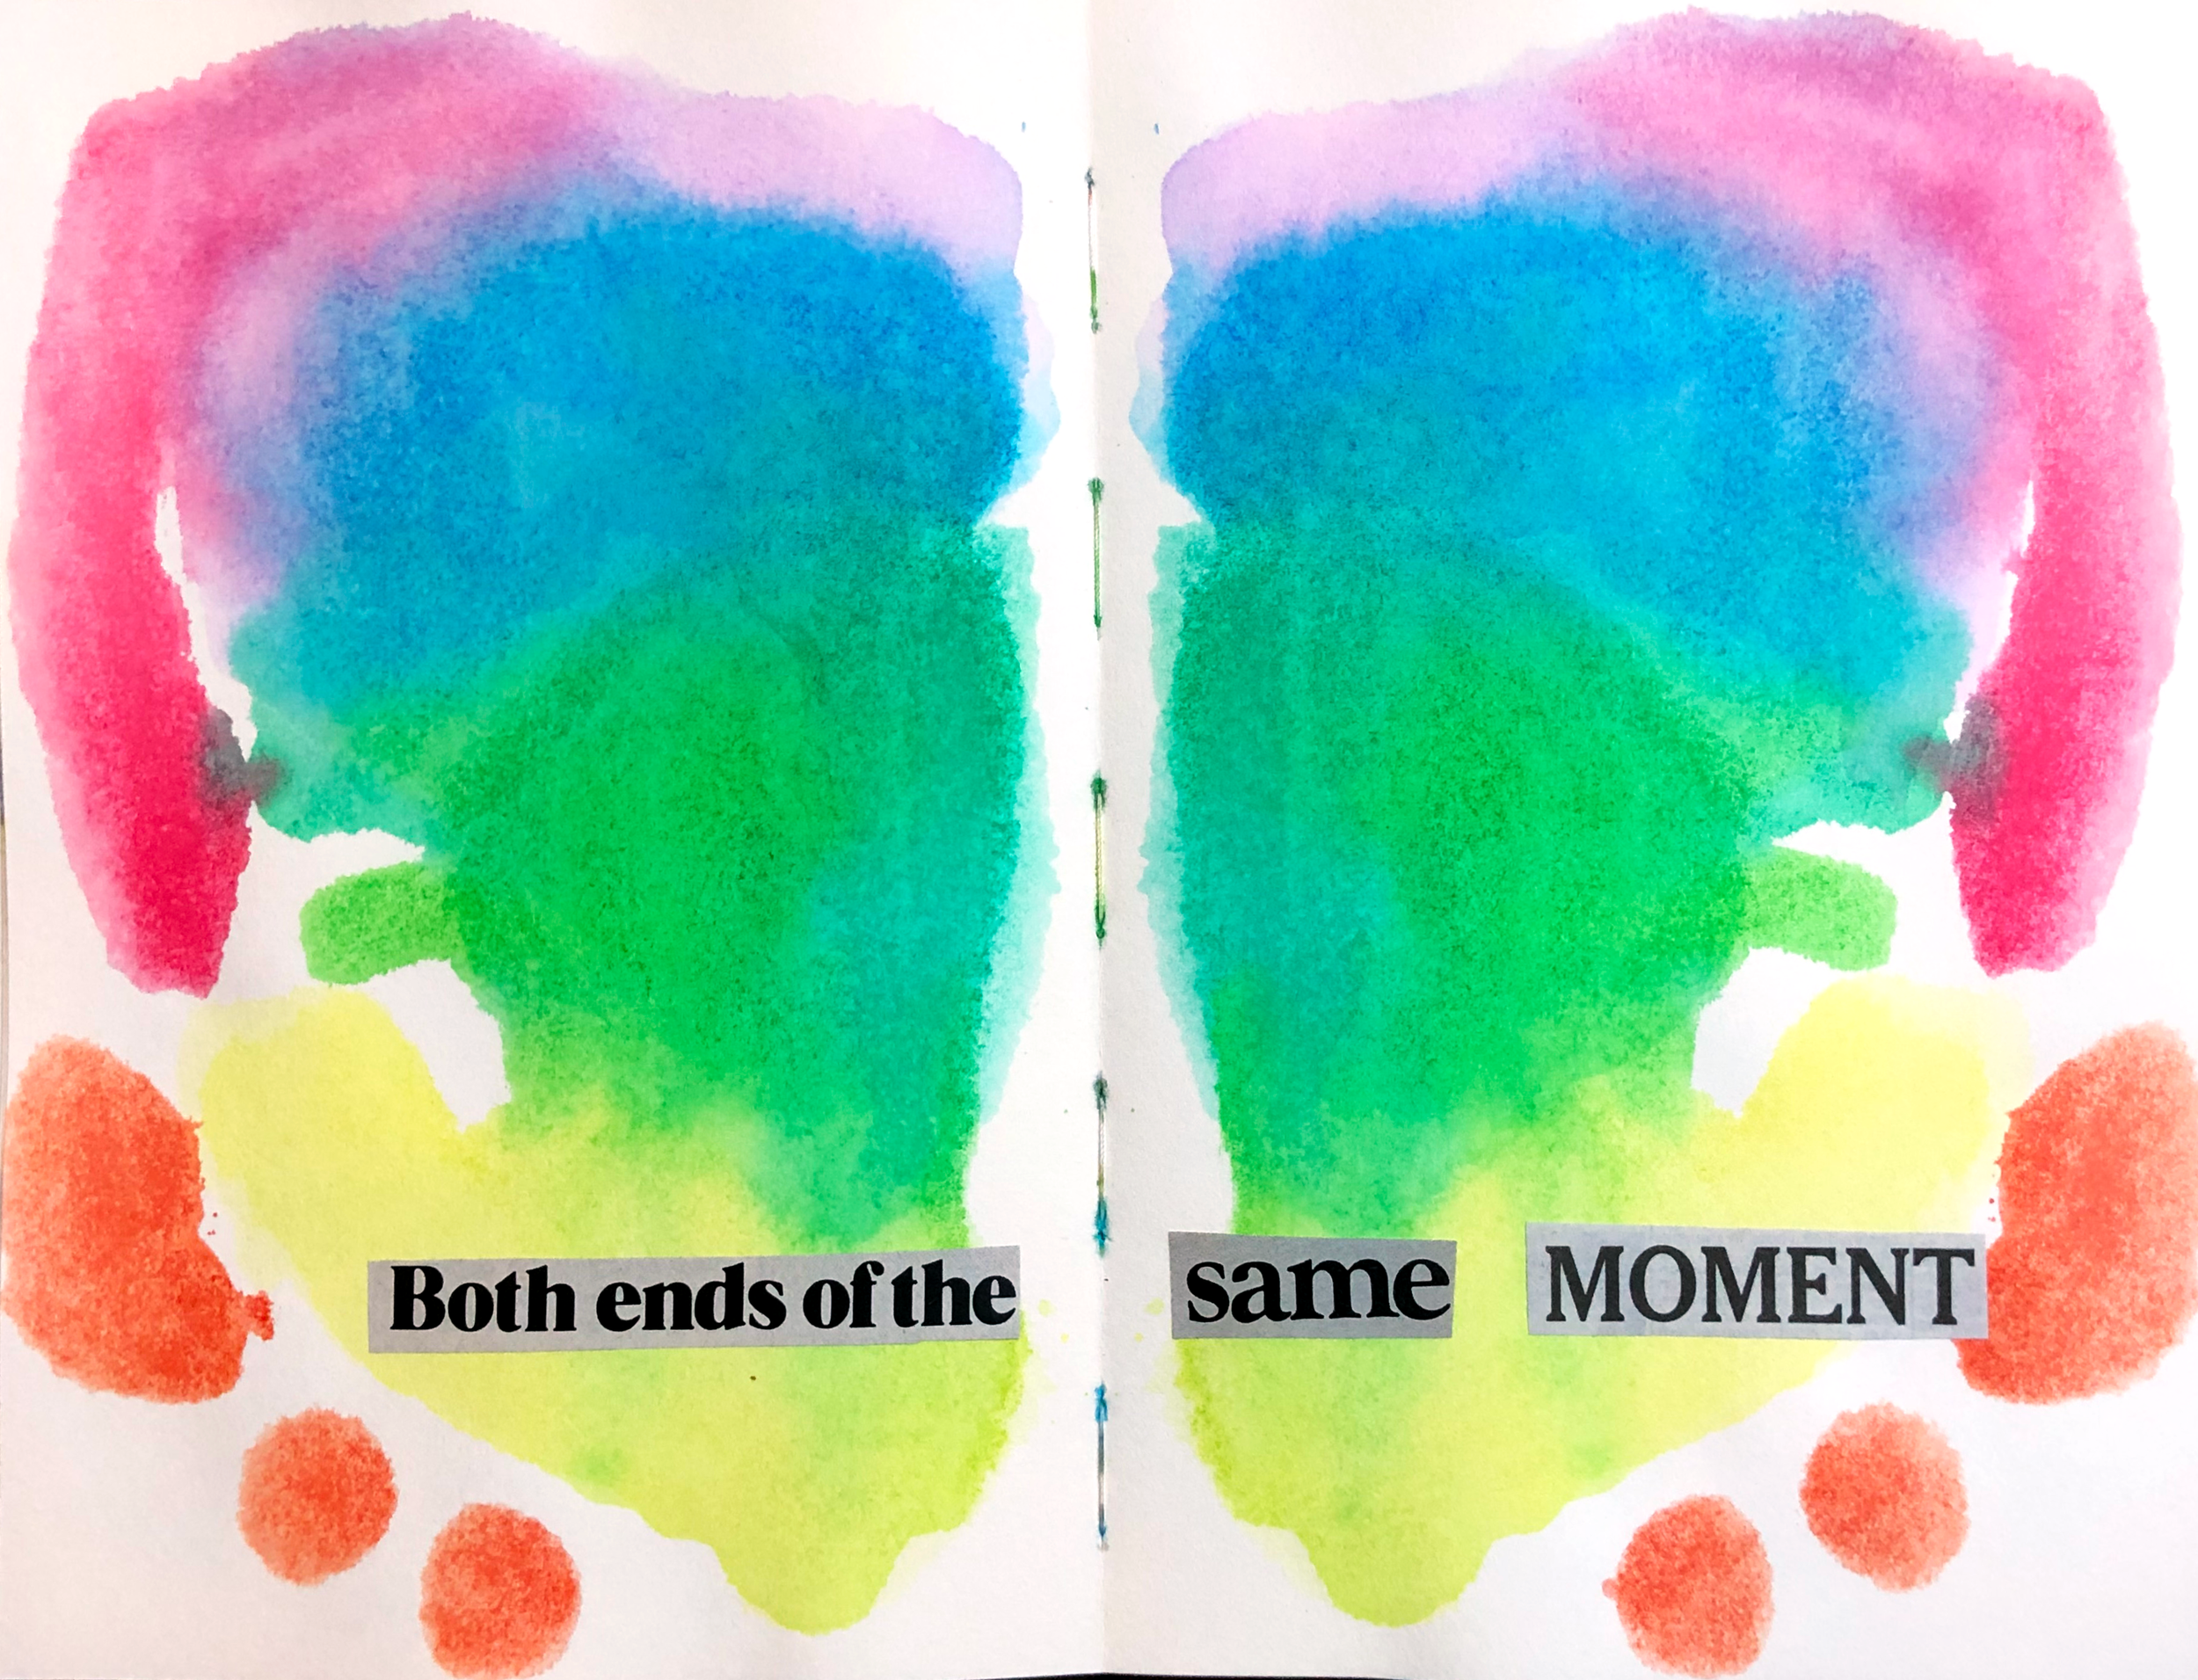 Both Ends of the same moment